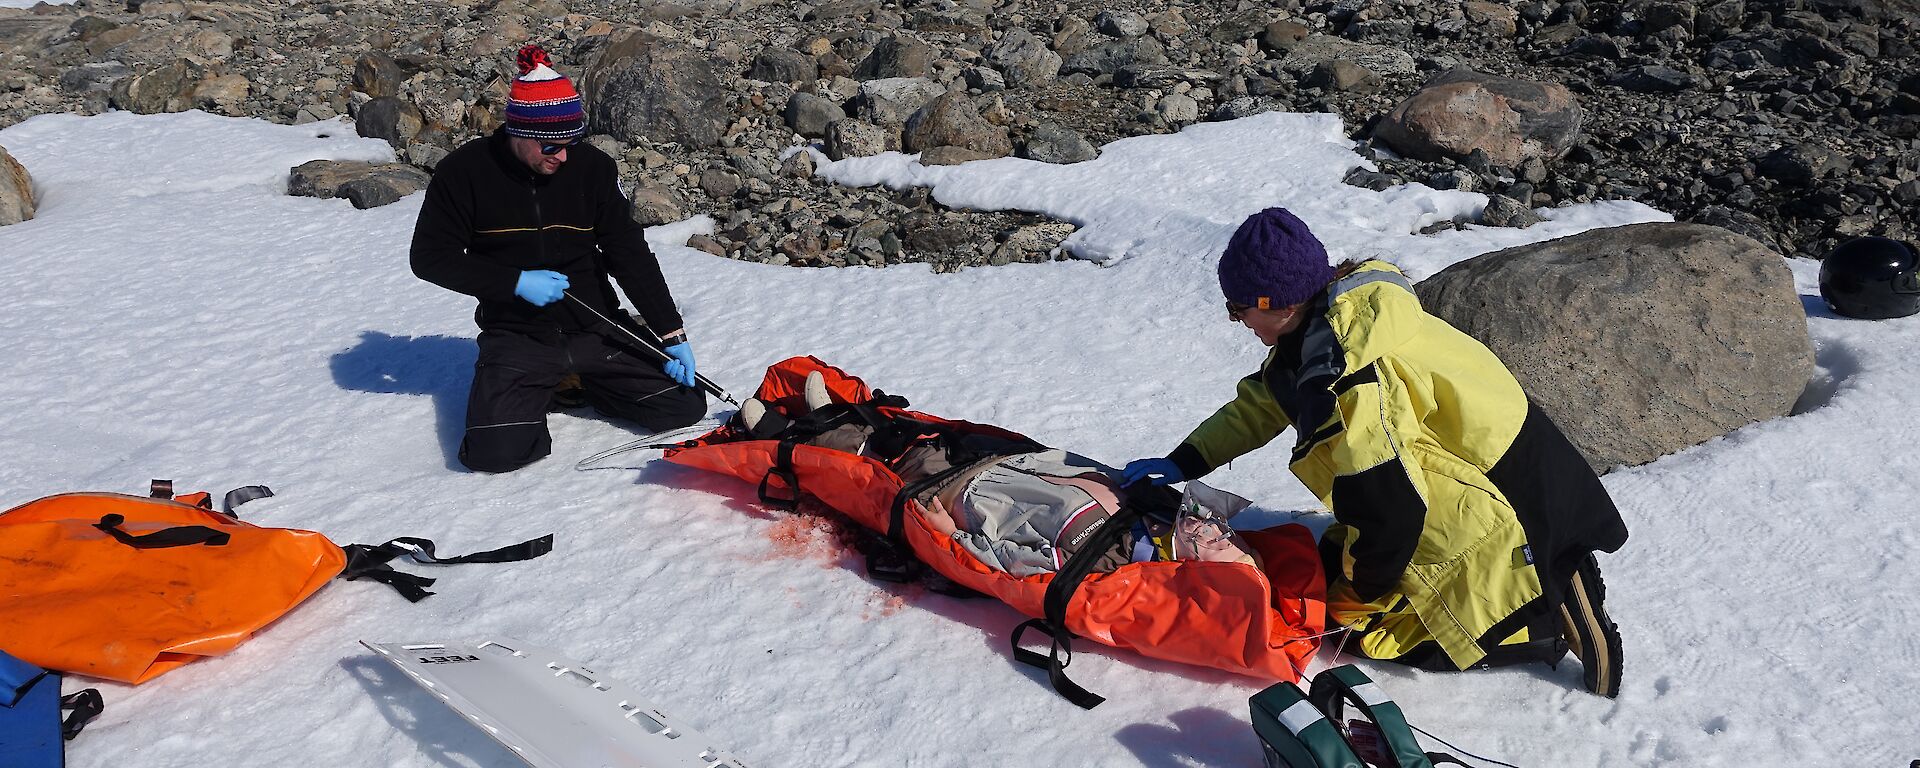 John Cherry (left) and Jessie Ling secure a patient for transport during scenario training at Casey station.